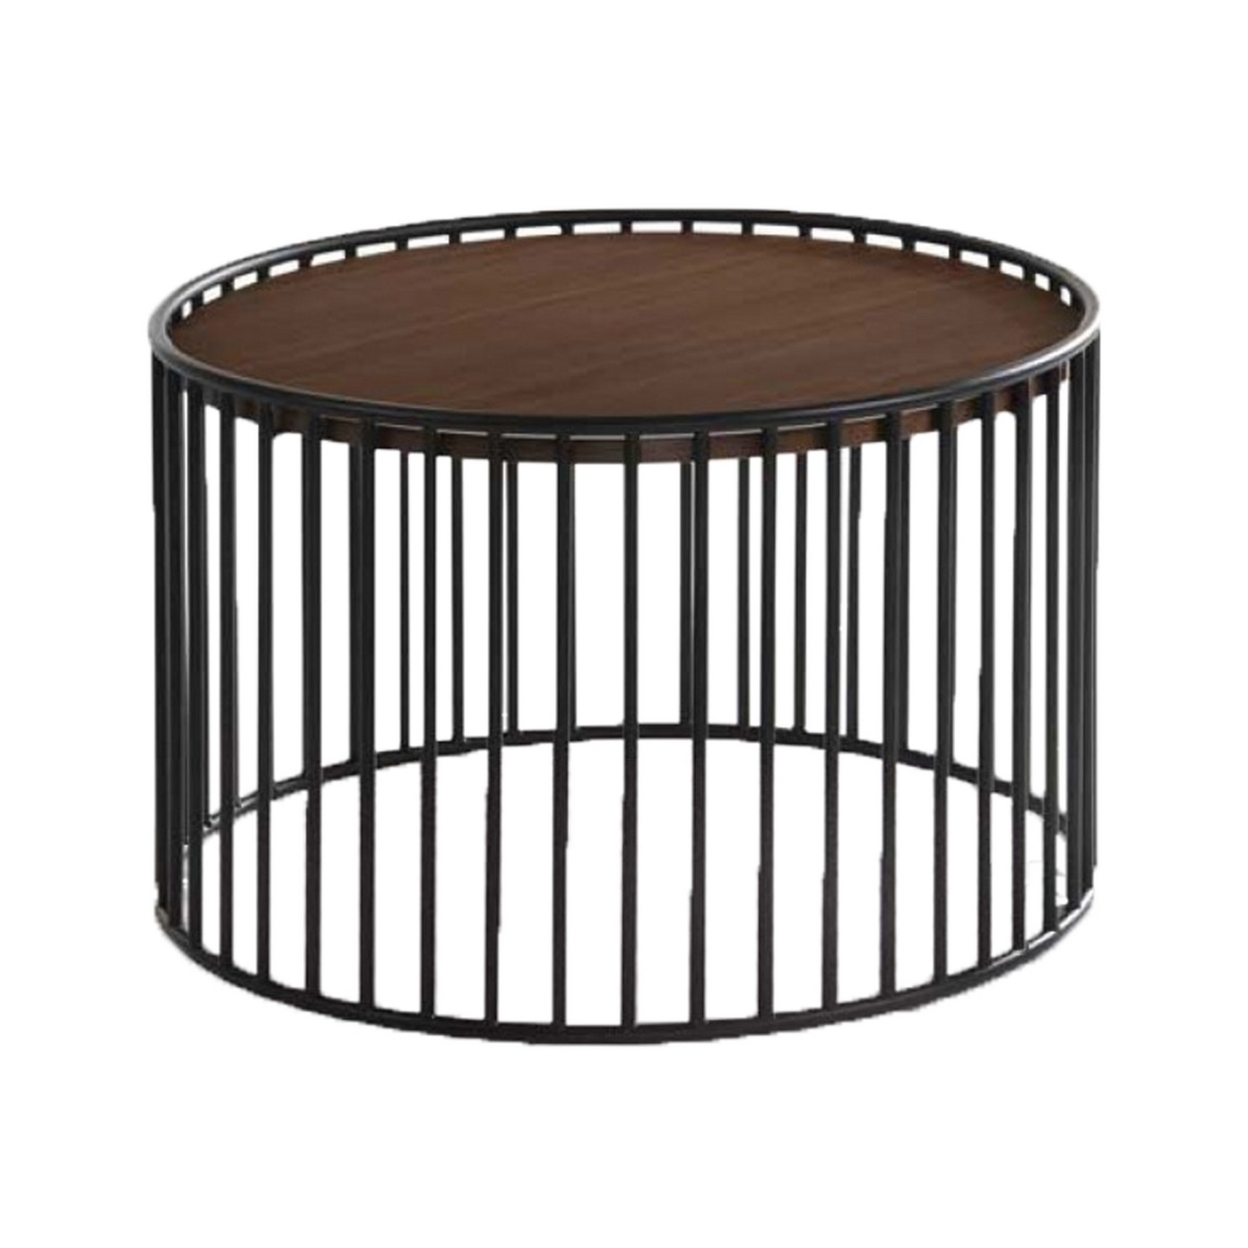 Circular Cage Shaped Metal End Table With Wood Top, Brown And Black- Saltoro Sherpi